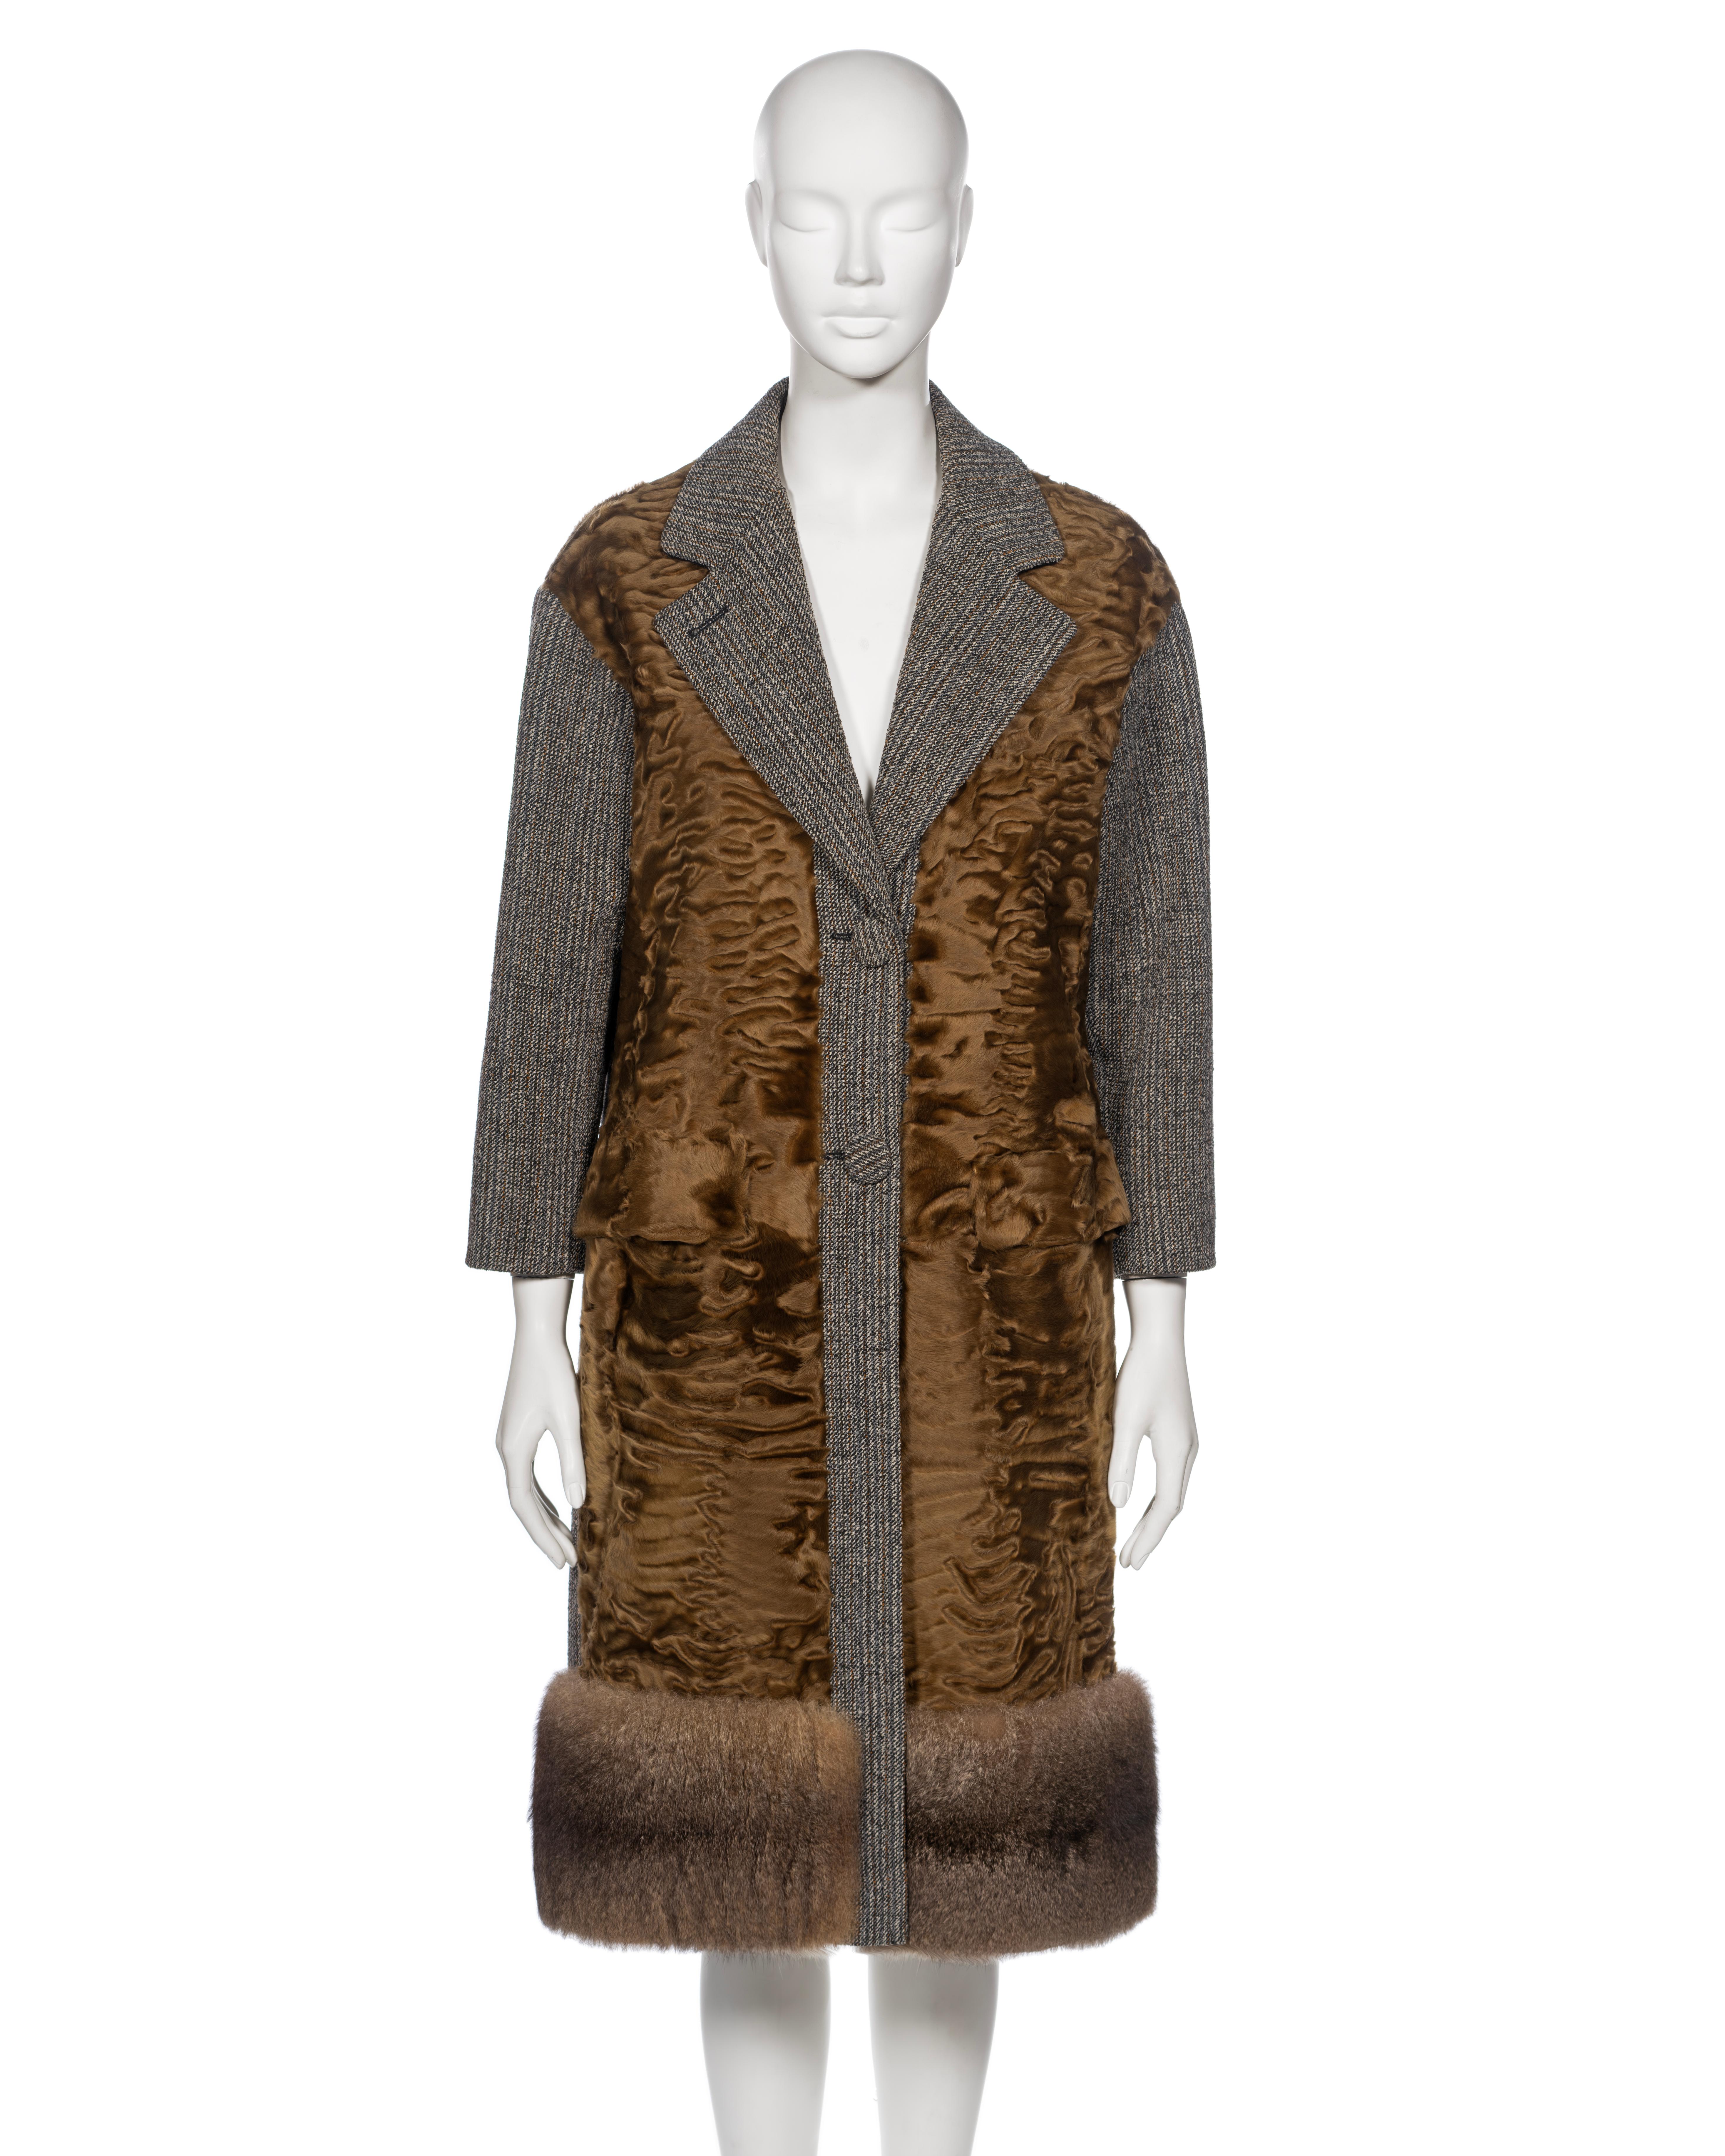 ▪ Brand: Prada
▪ Creative Director: Miuccia Prada
▪ Collection: Fall-Winter 2016
▪ Sold by: One of a Kind Archive
▪ Fabric: Dyed Swakara Lamb Fur, Virgin Wol, Nylon, Brush Tail Possum Fur, Viscose
▪ Size: EU 36 - SMALL
▪ Made in: Italy
▪ Condition: